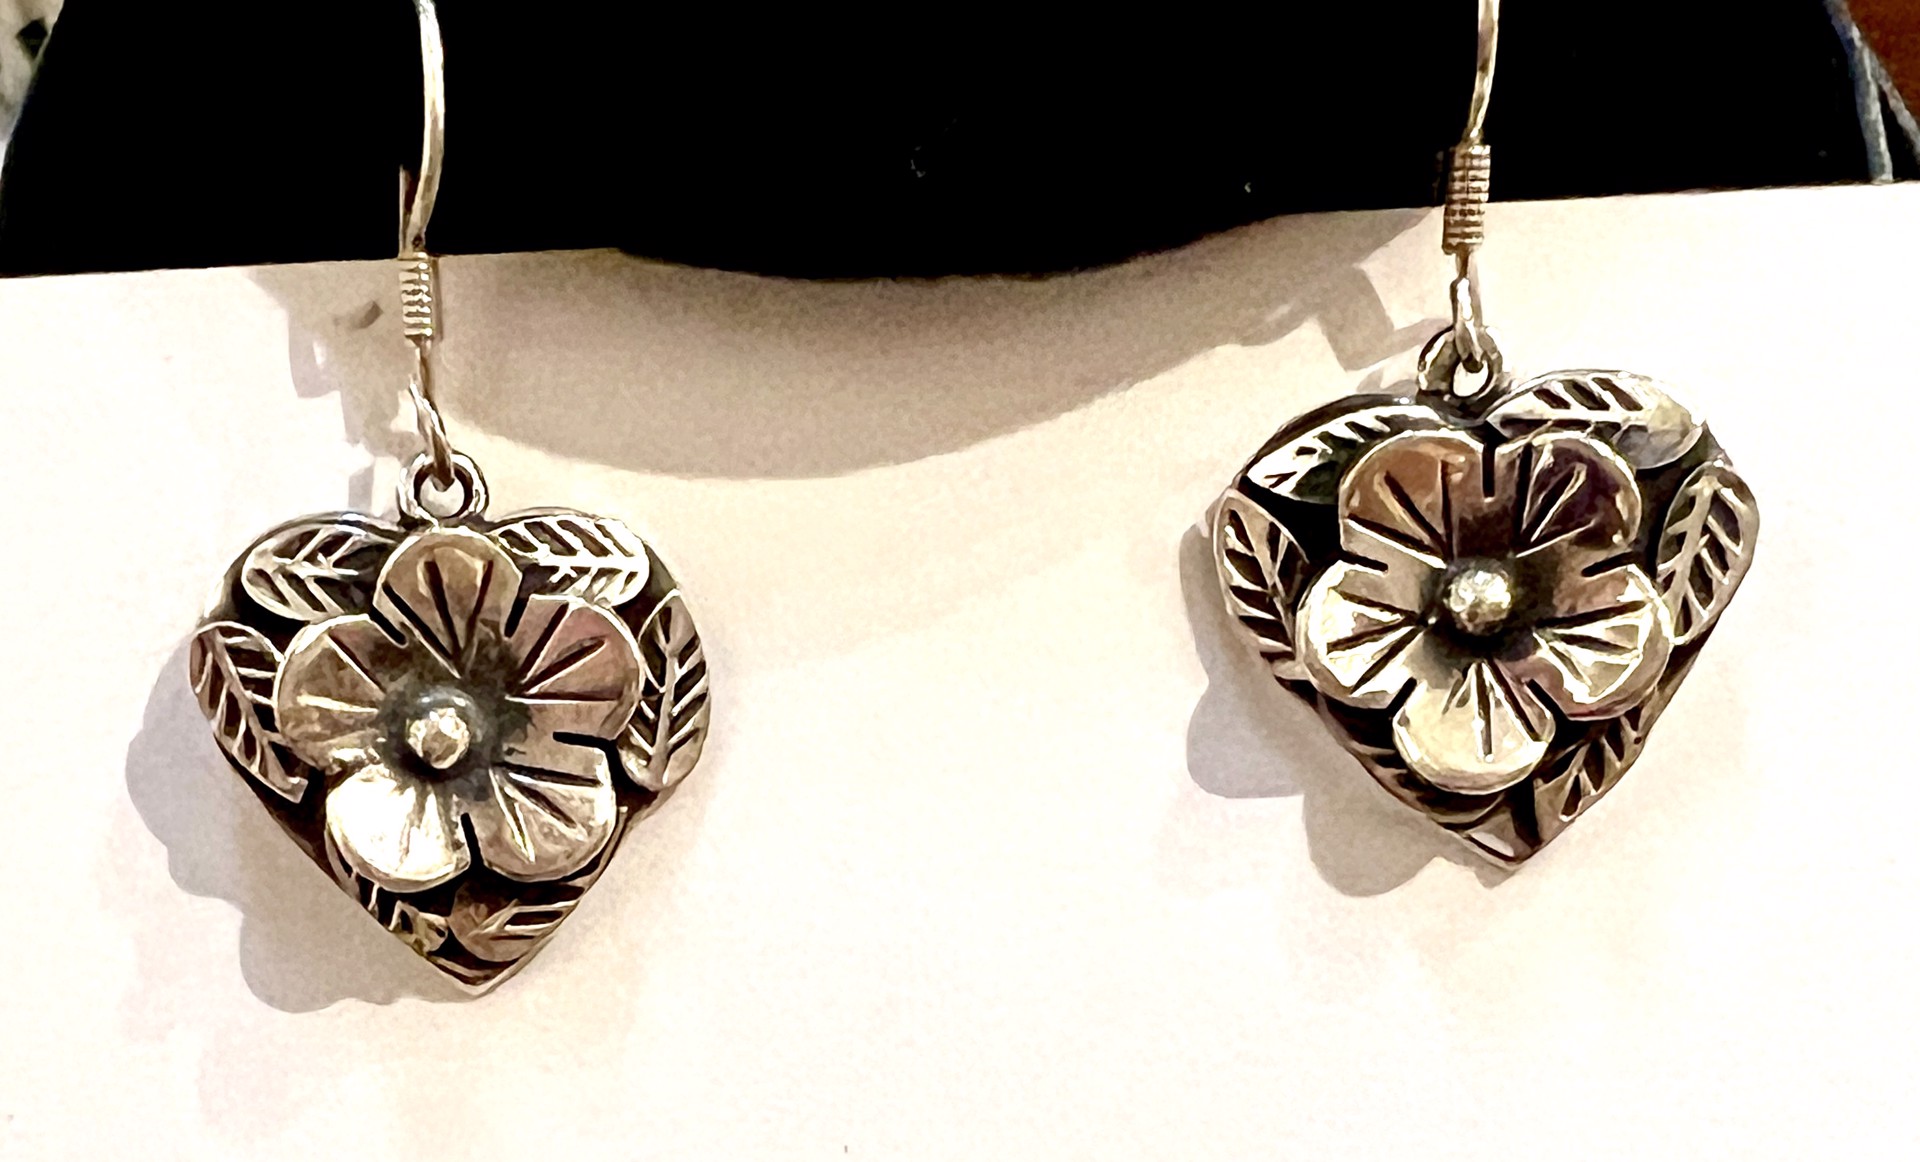 Earrings - 3D Hearts and Flowers, Sterling Silver by Indigo Desert Ranch - Jewelry